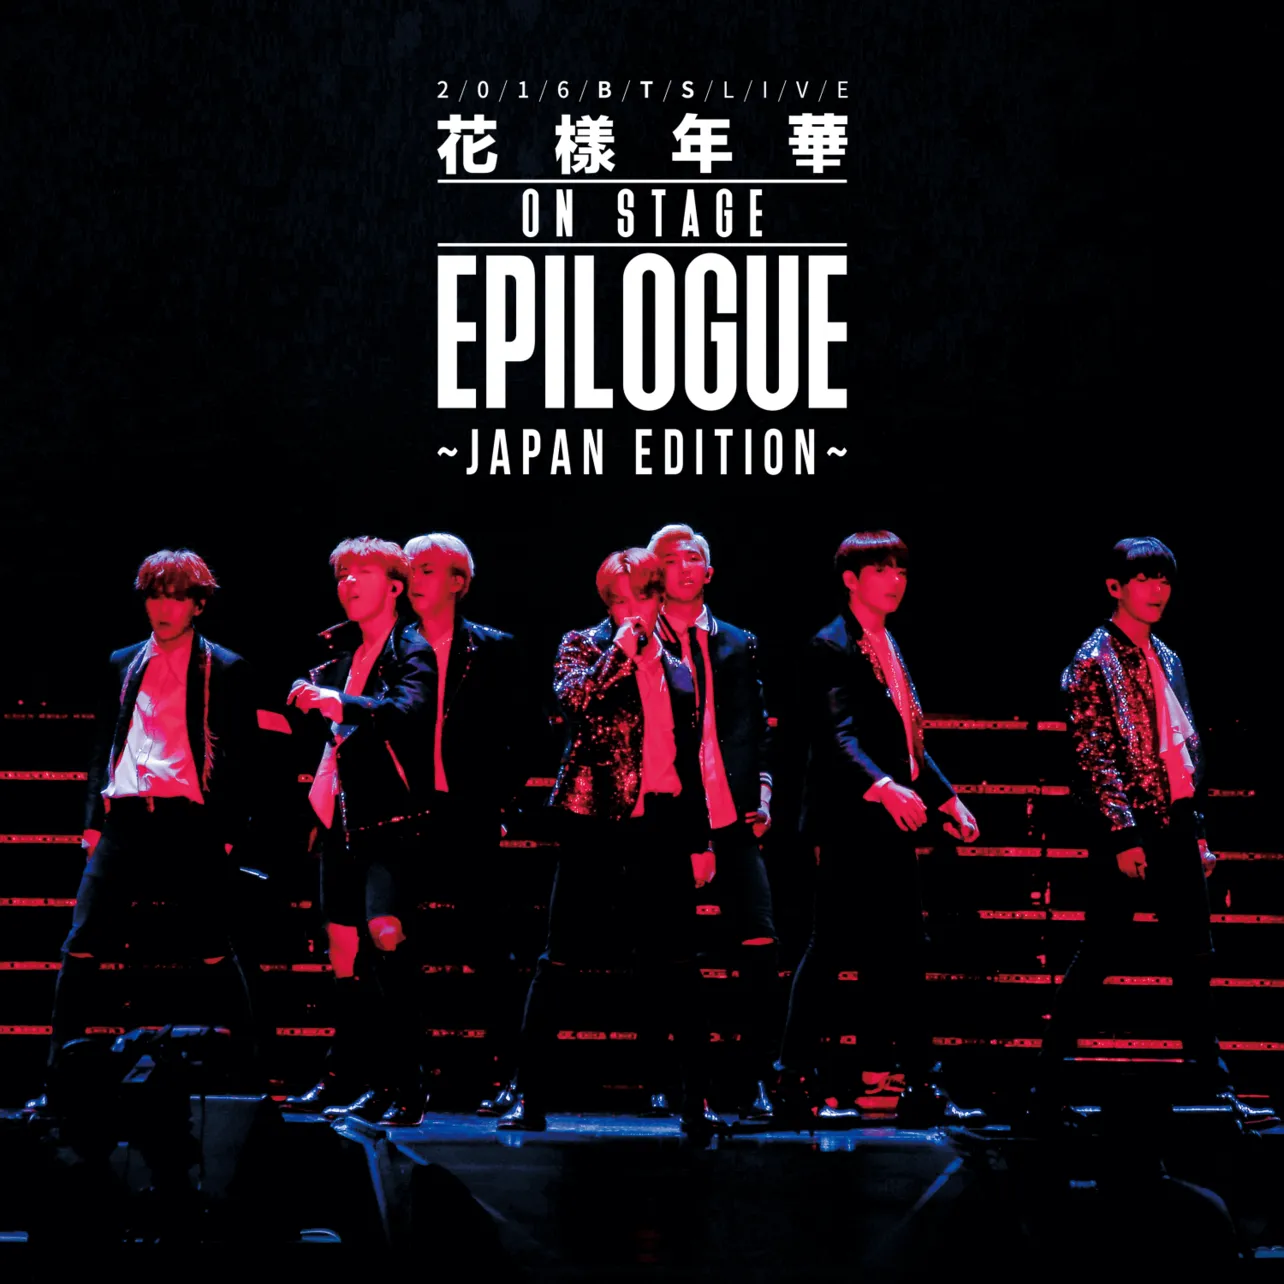 「2016 BTS LIVE＜花様年華 on stage：epilogue＞～Japan Edition～」は7月28日(金)より配信